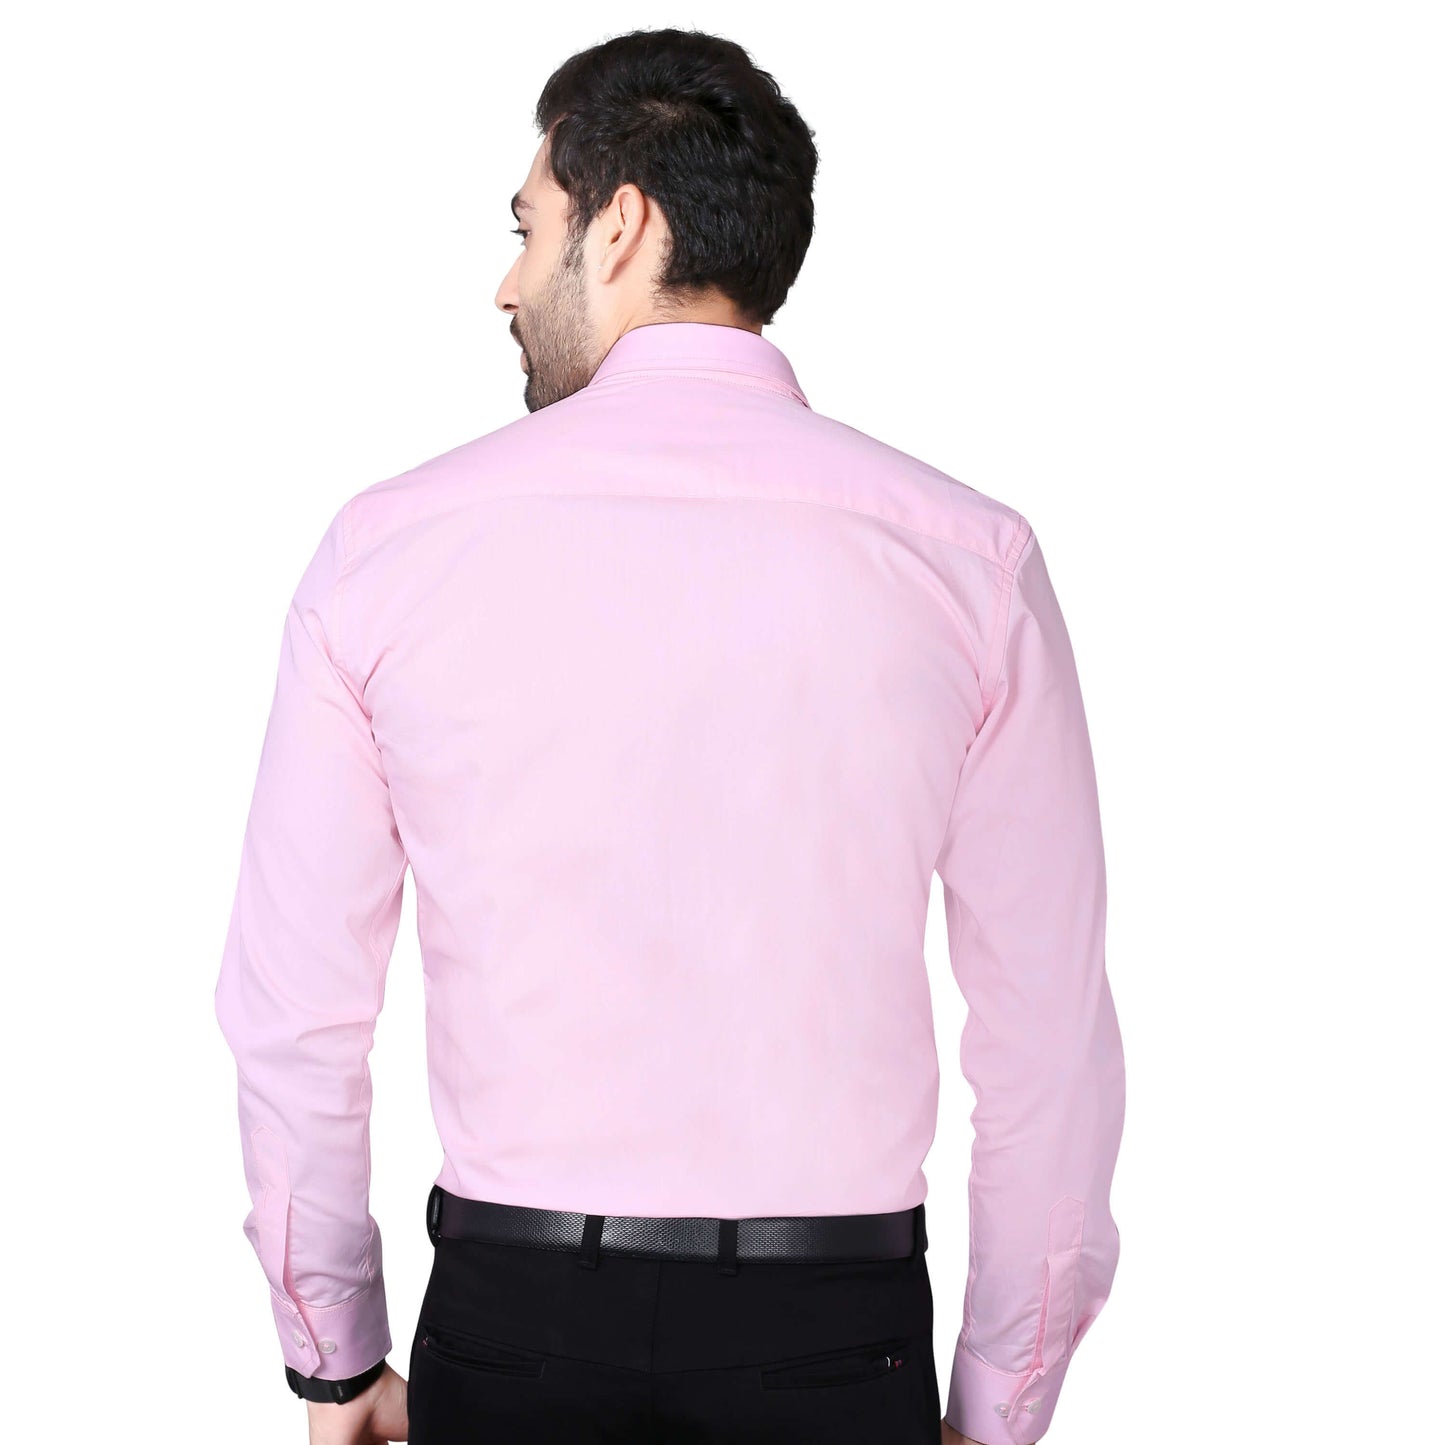 5thanfold Men's Formal Pure Cotton Full Sleeve Solid Pink Slim Fit Shirt